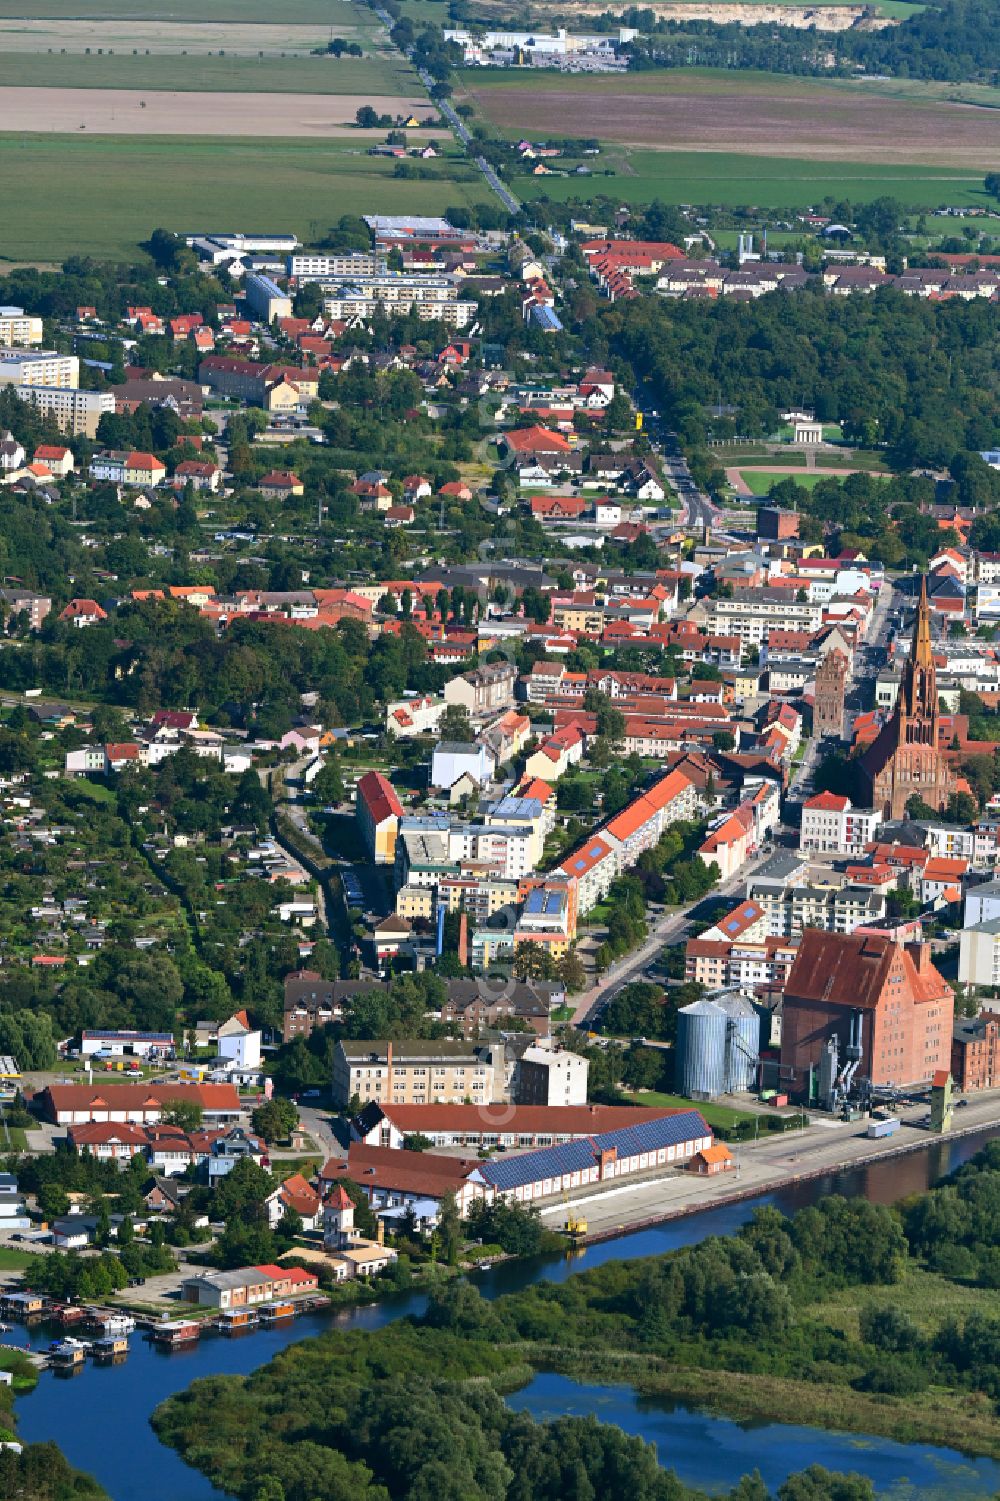 Aerial photograph Demmin - City view of downtown area in Demmin in the state Mecklenburg - Western Pomerania, Germany